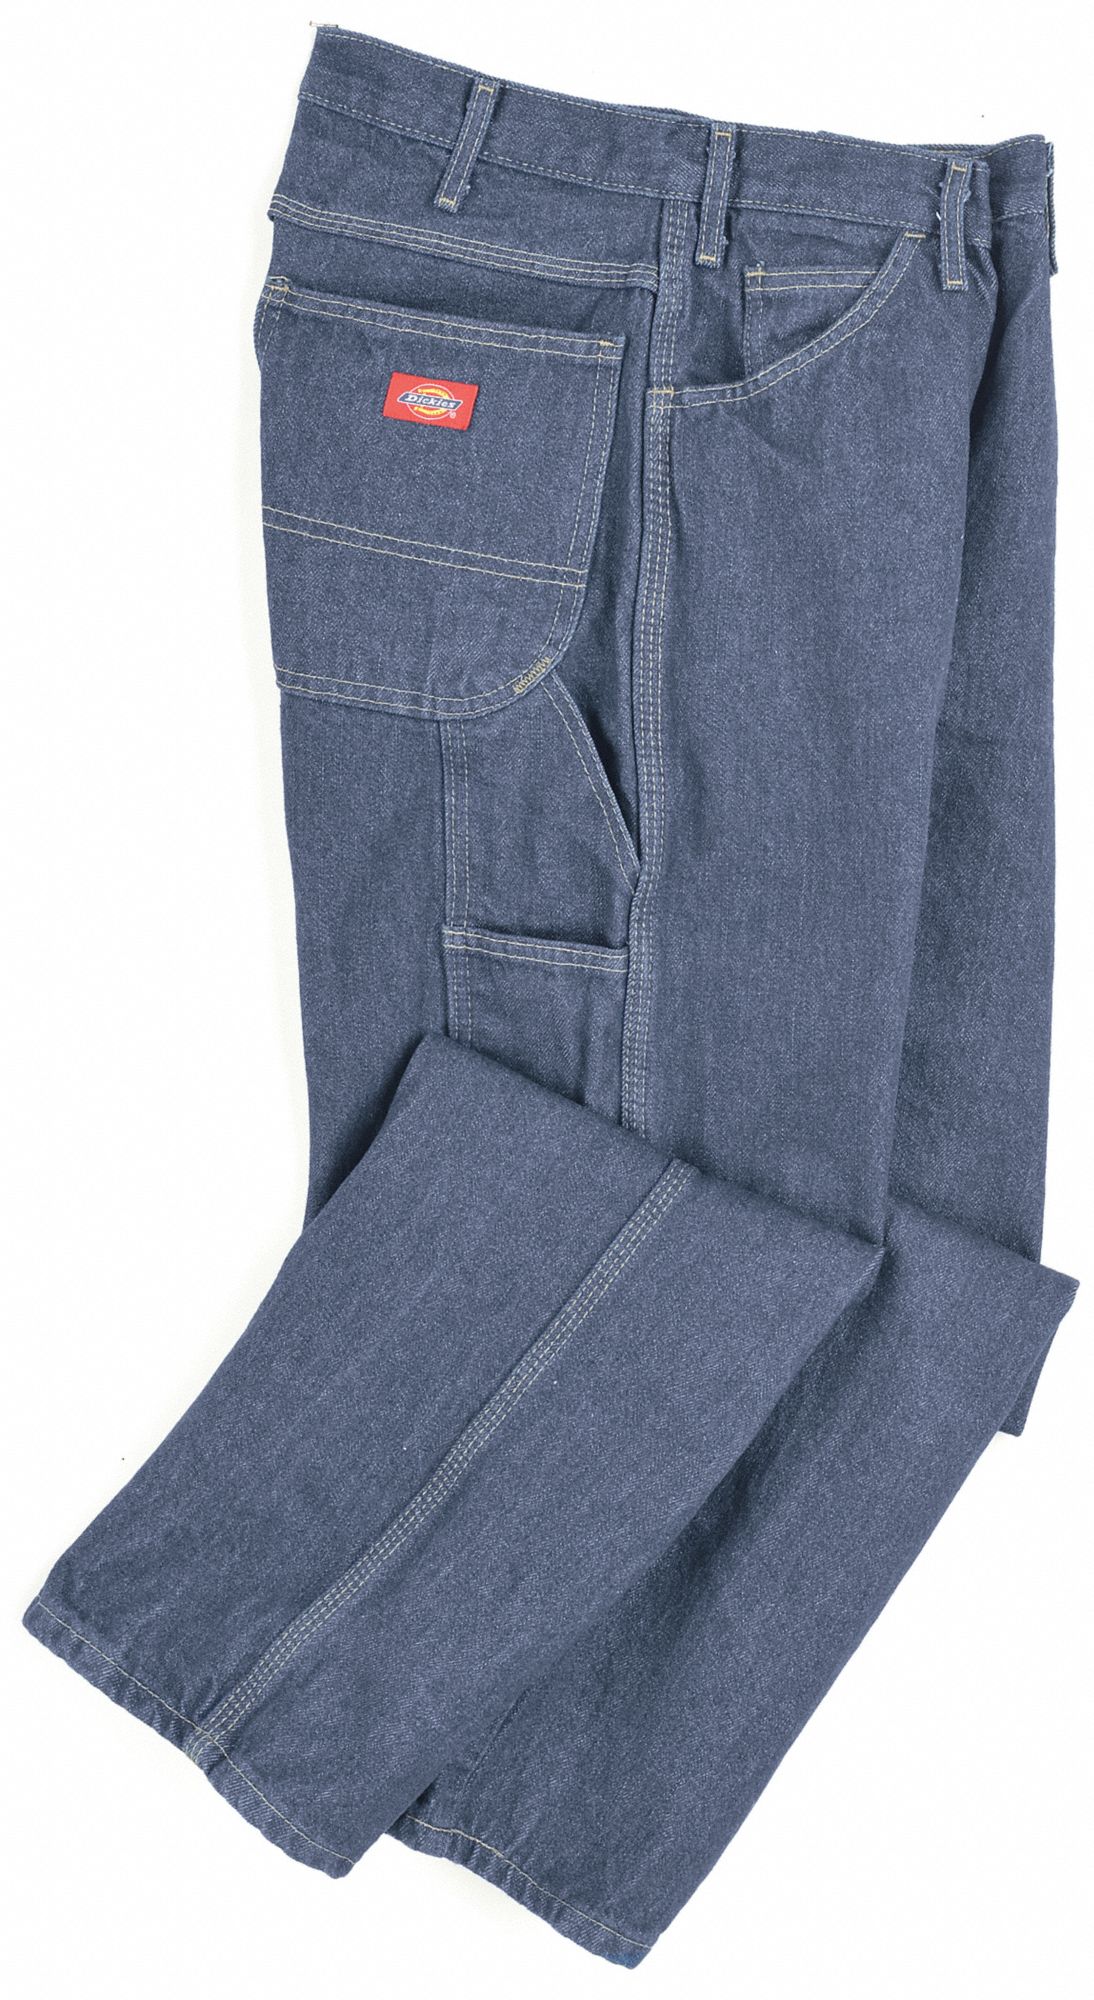 46 32 jeans